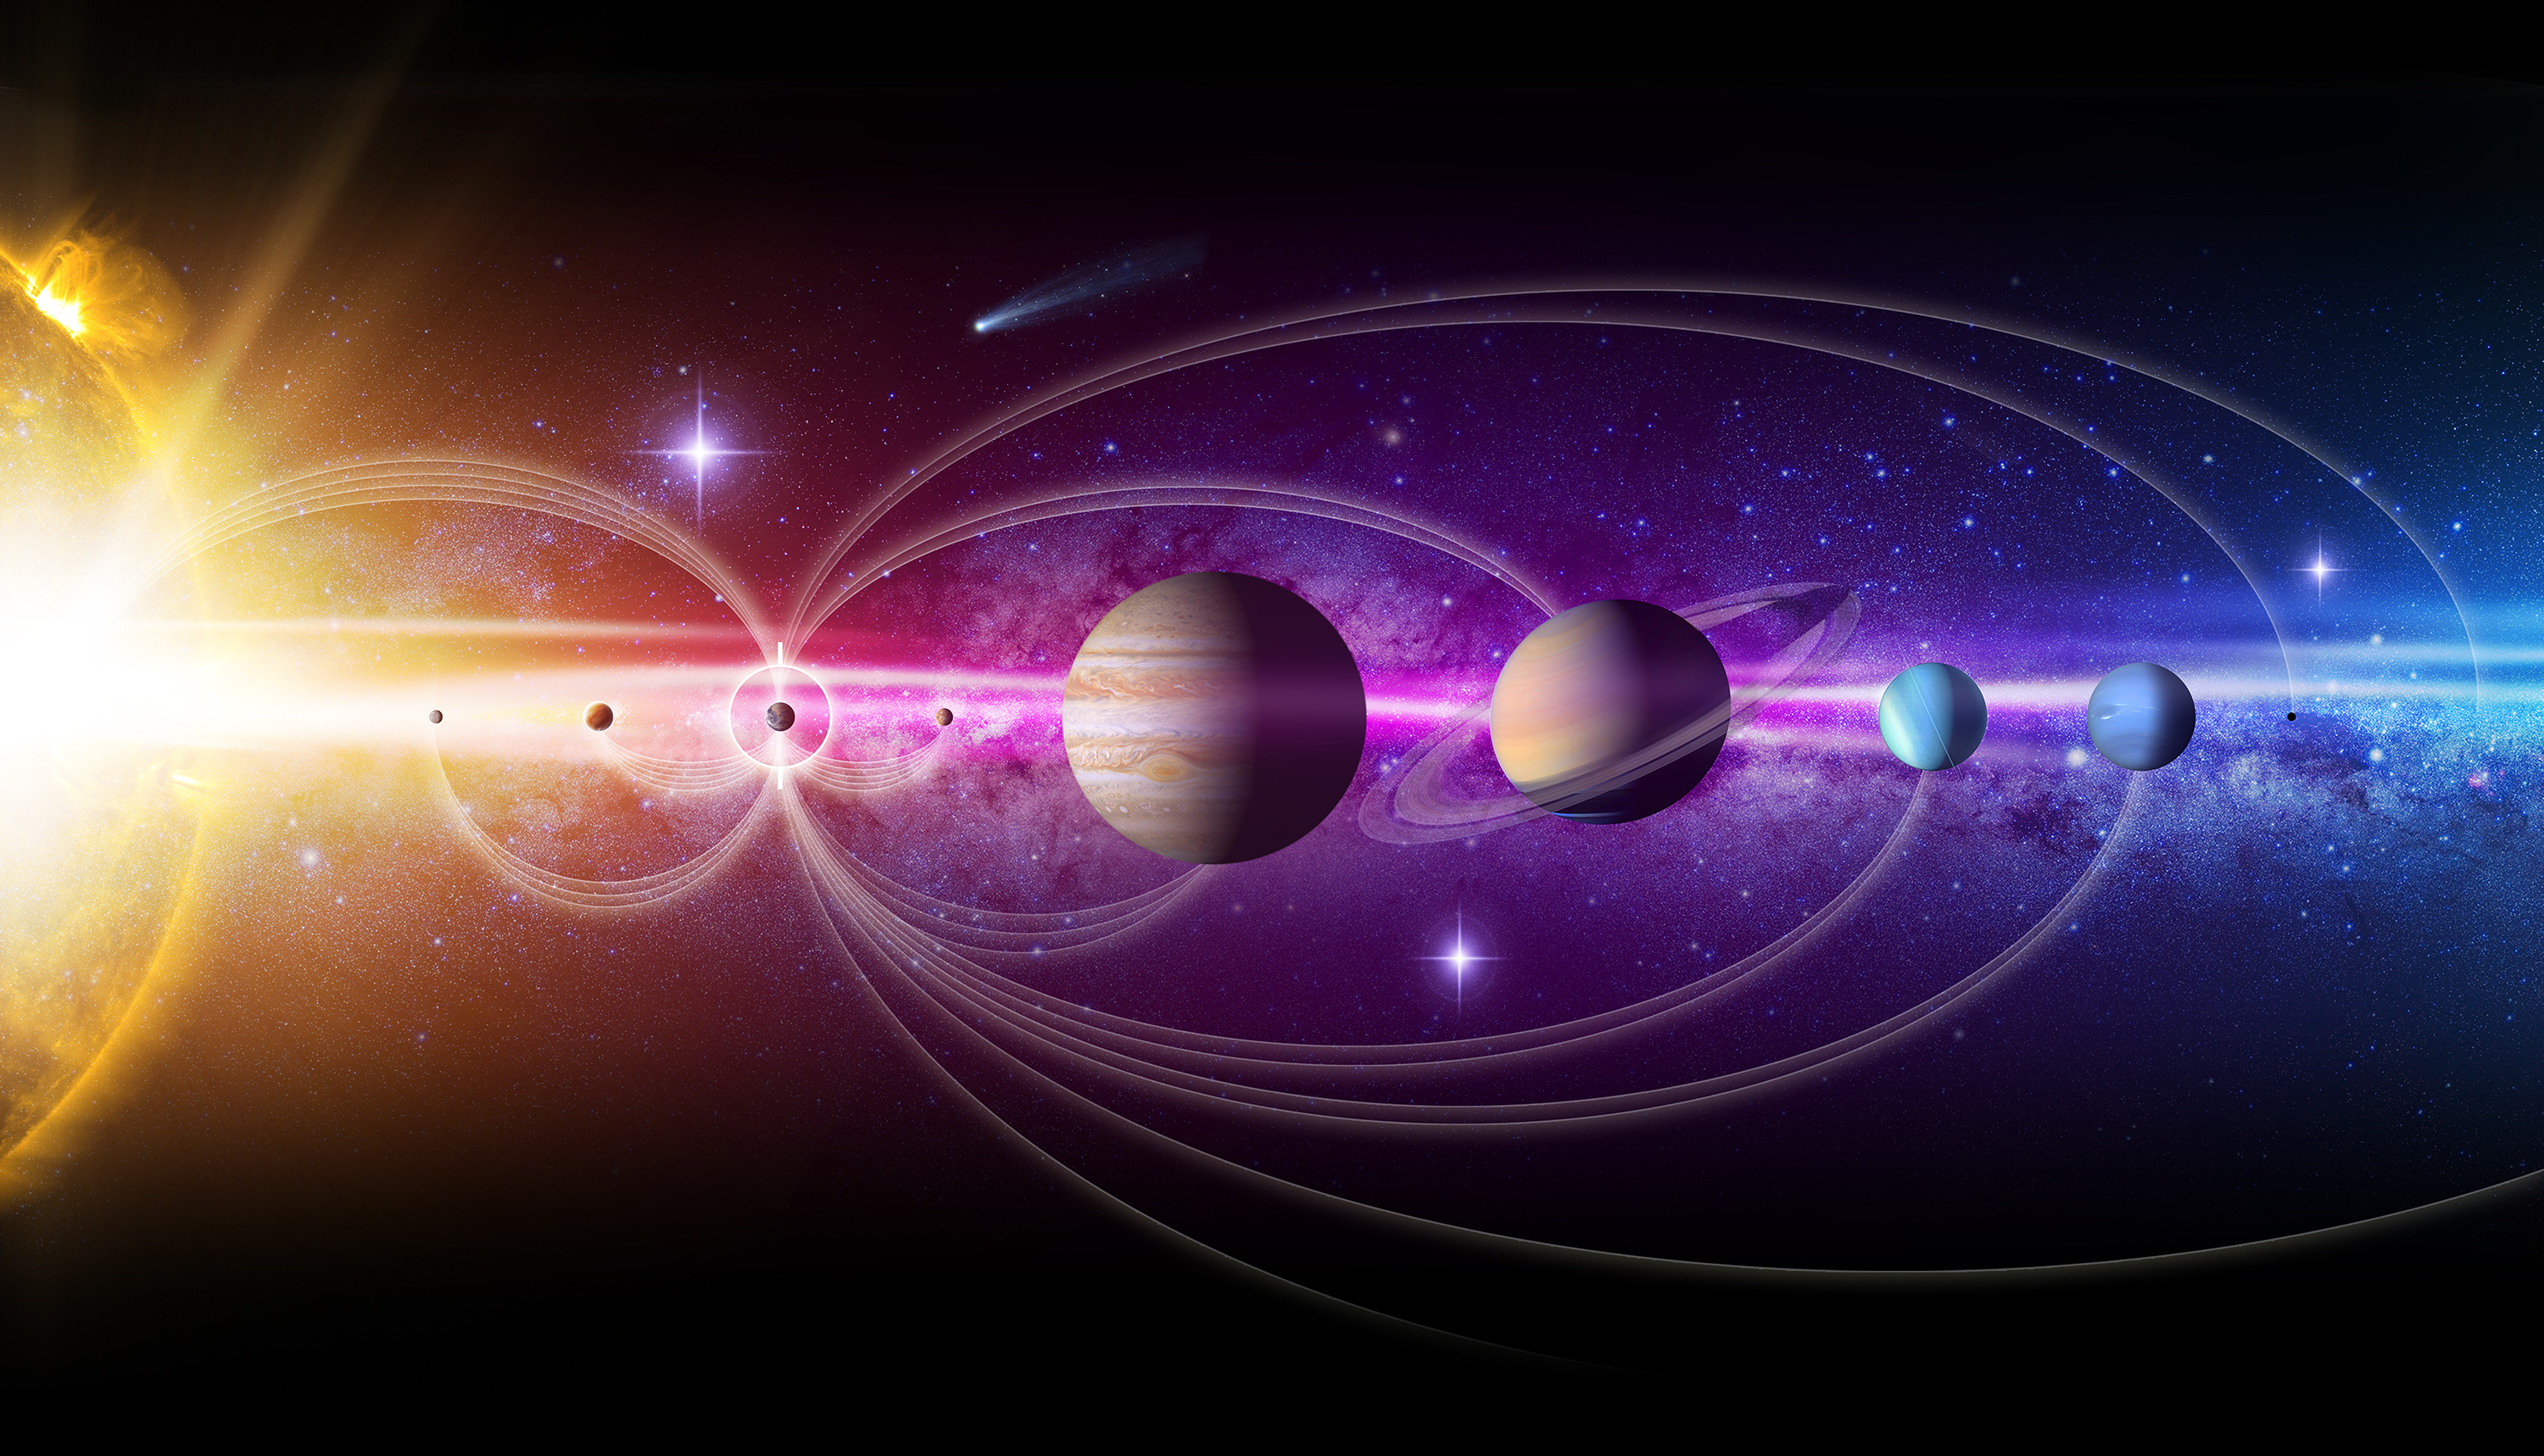 Illustration showing orbit lines emanating from Earth and extending throughout our solar system.